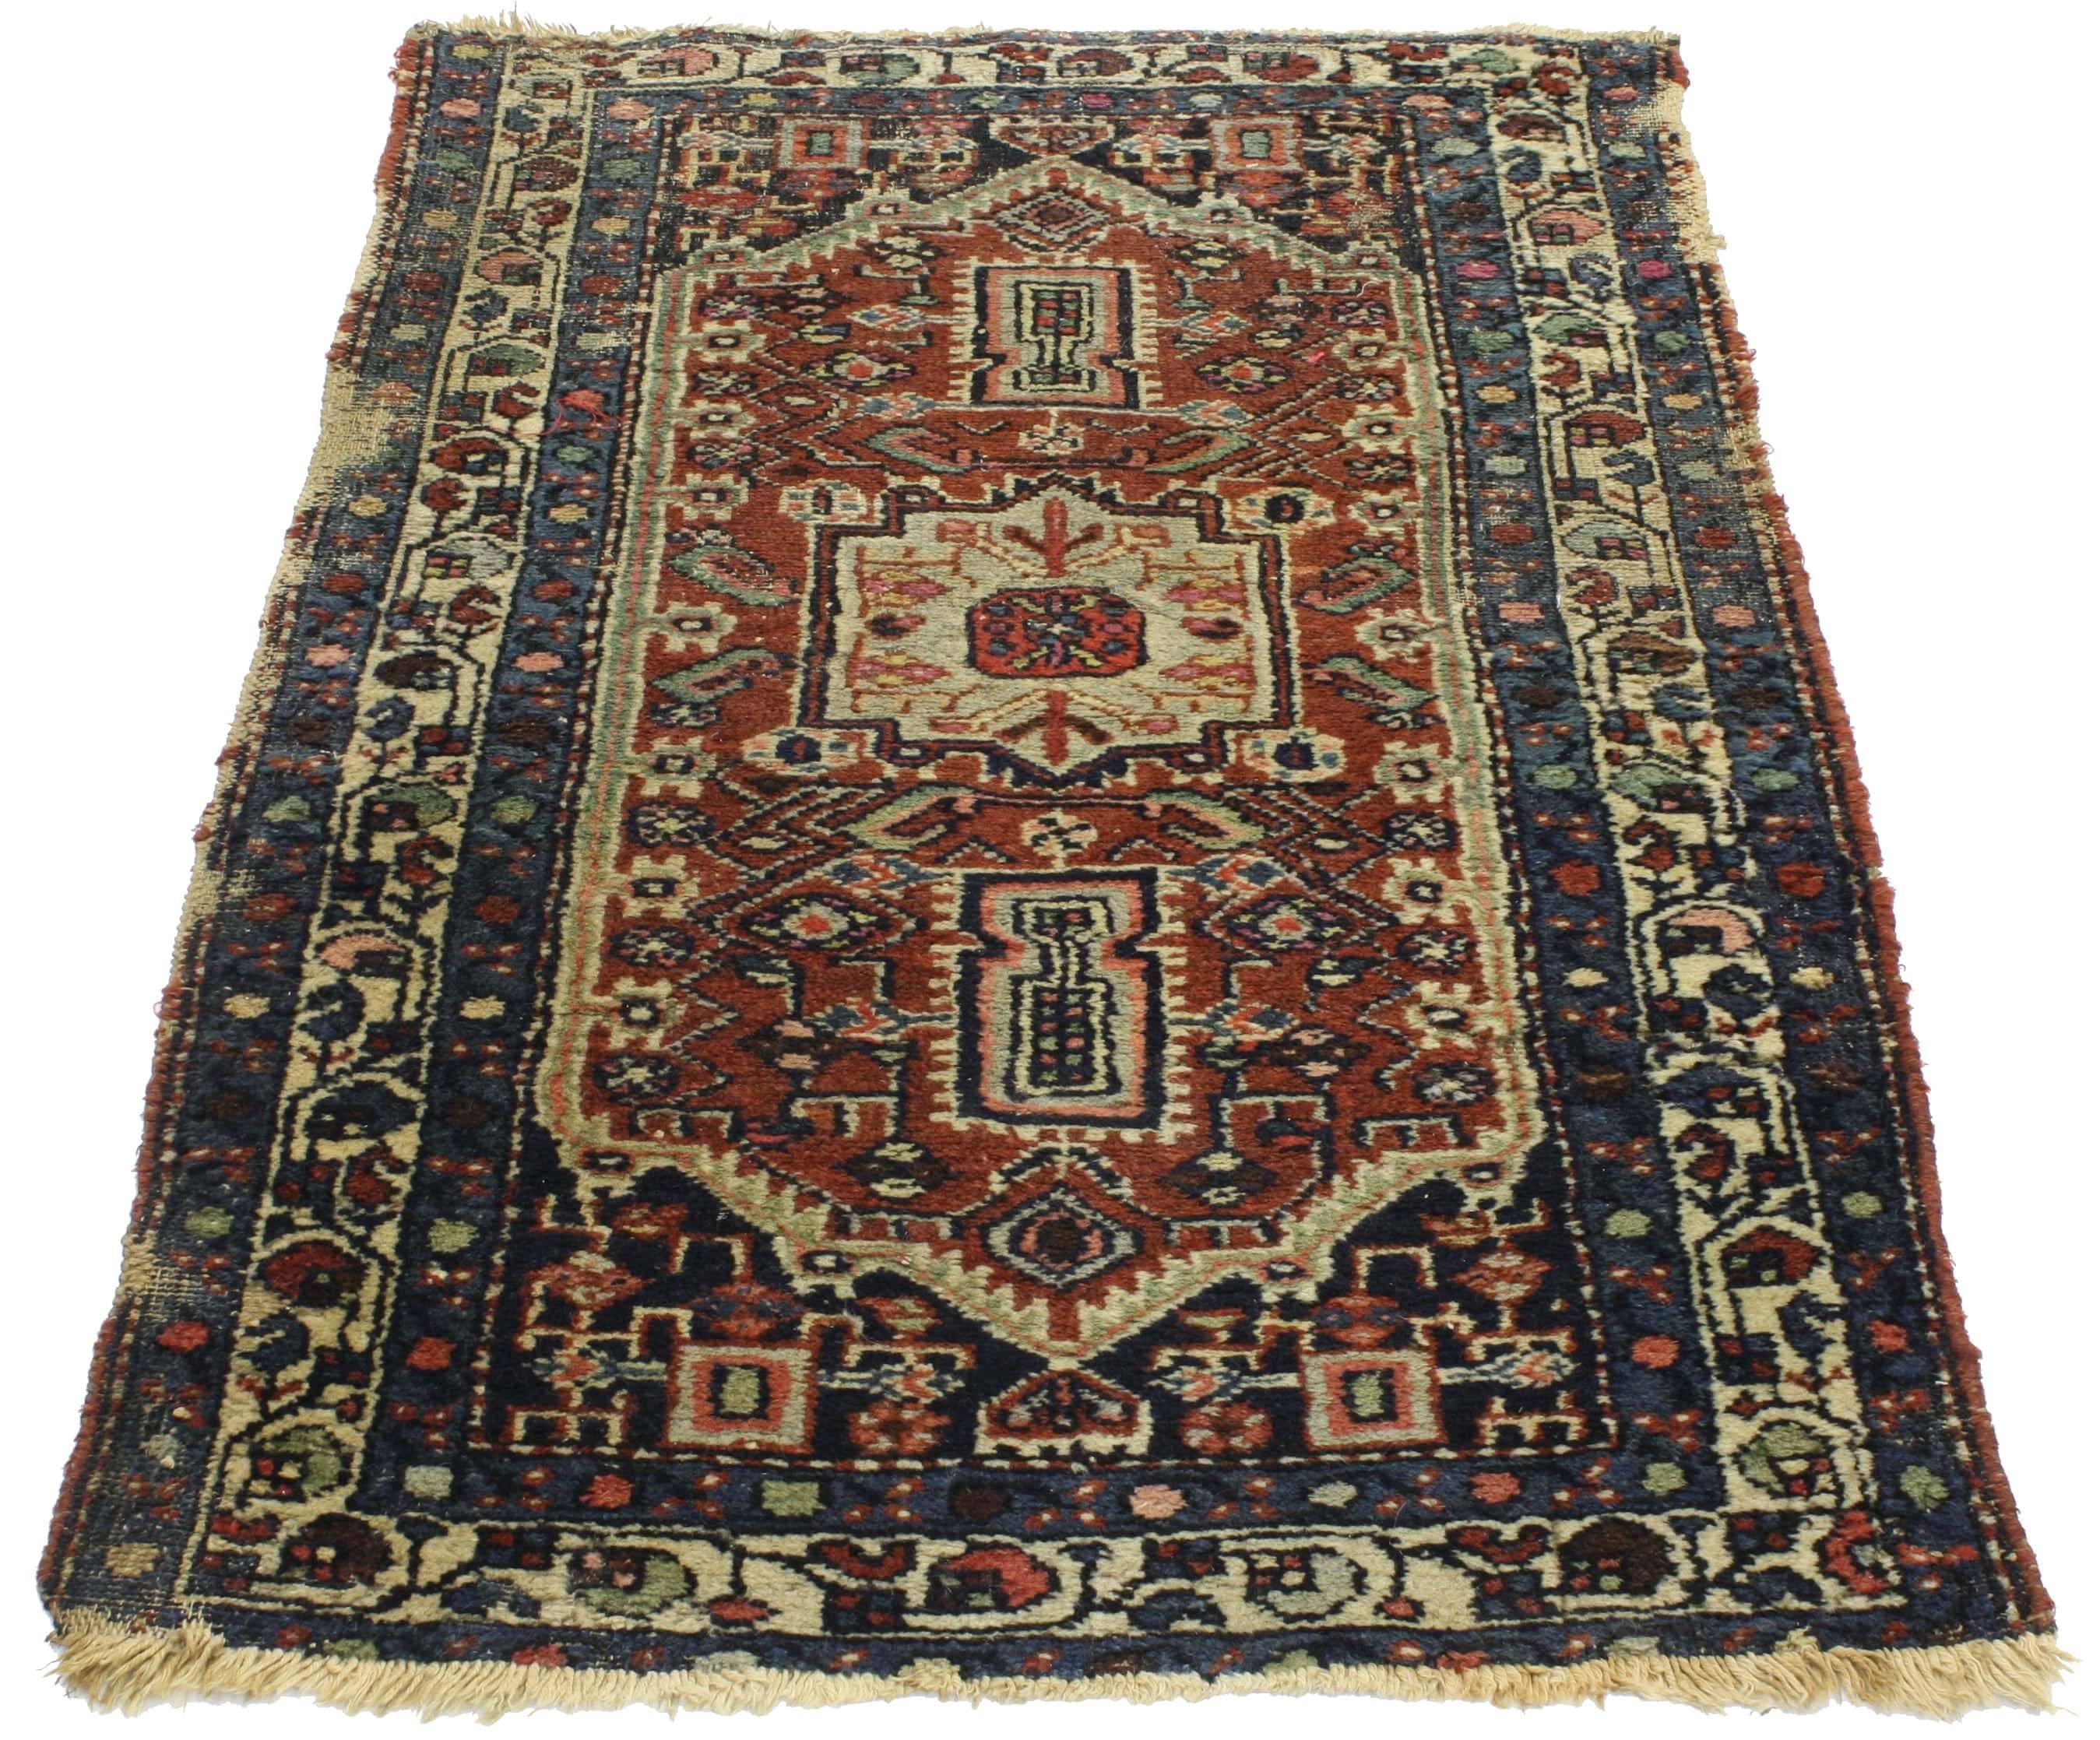 76667 Distressed Antique Persian Heriz rug, study or home office worn rug. Time-worn and richly ornamented, this distressed antique Persian Heriz rug offers warm and cool tones in a traditional medallion design. With its perfectly worn-in charm, pop